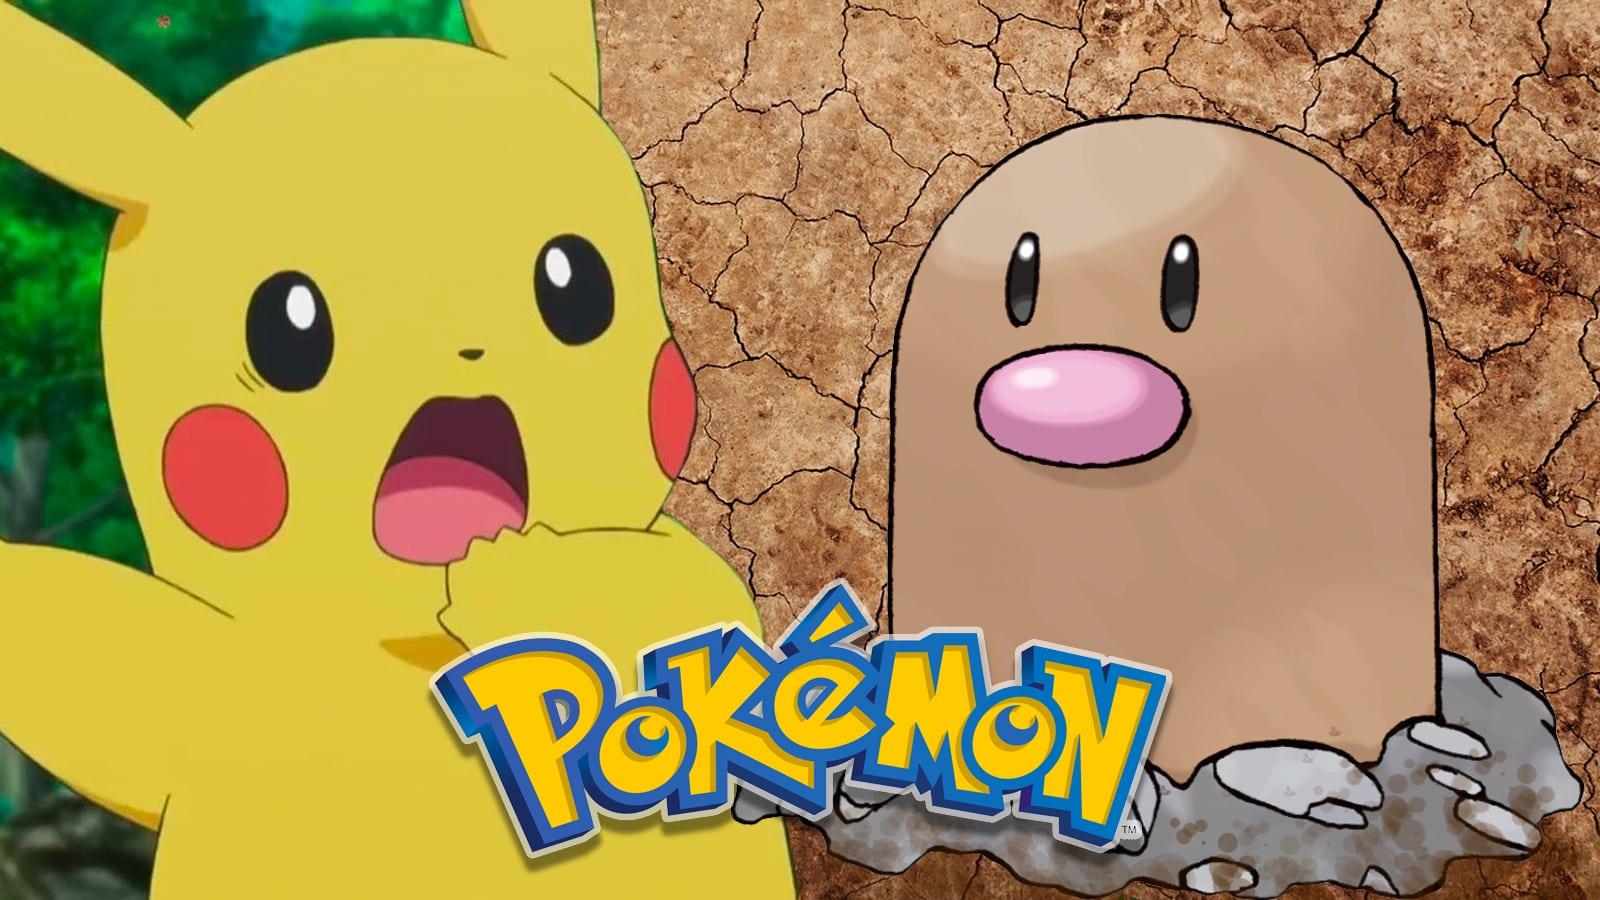 Watch this Pokemon TikTok and you'll never see Diglett the same way again